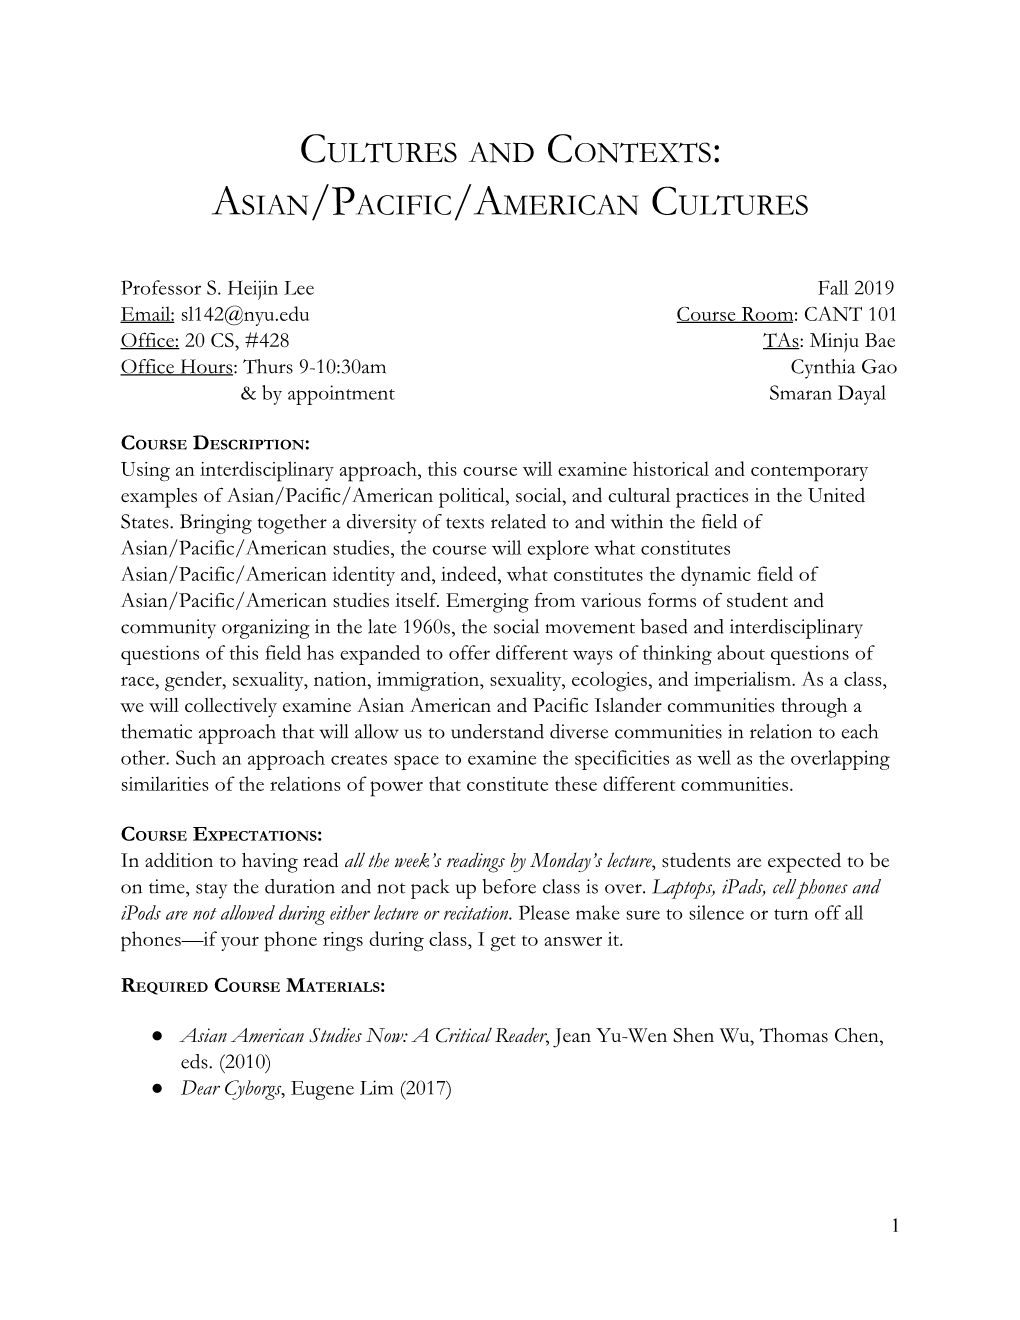 Cultures and Contexts: Asian/Pacific/American Cultures